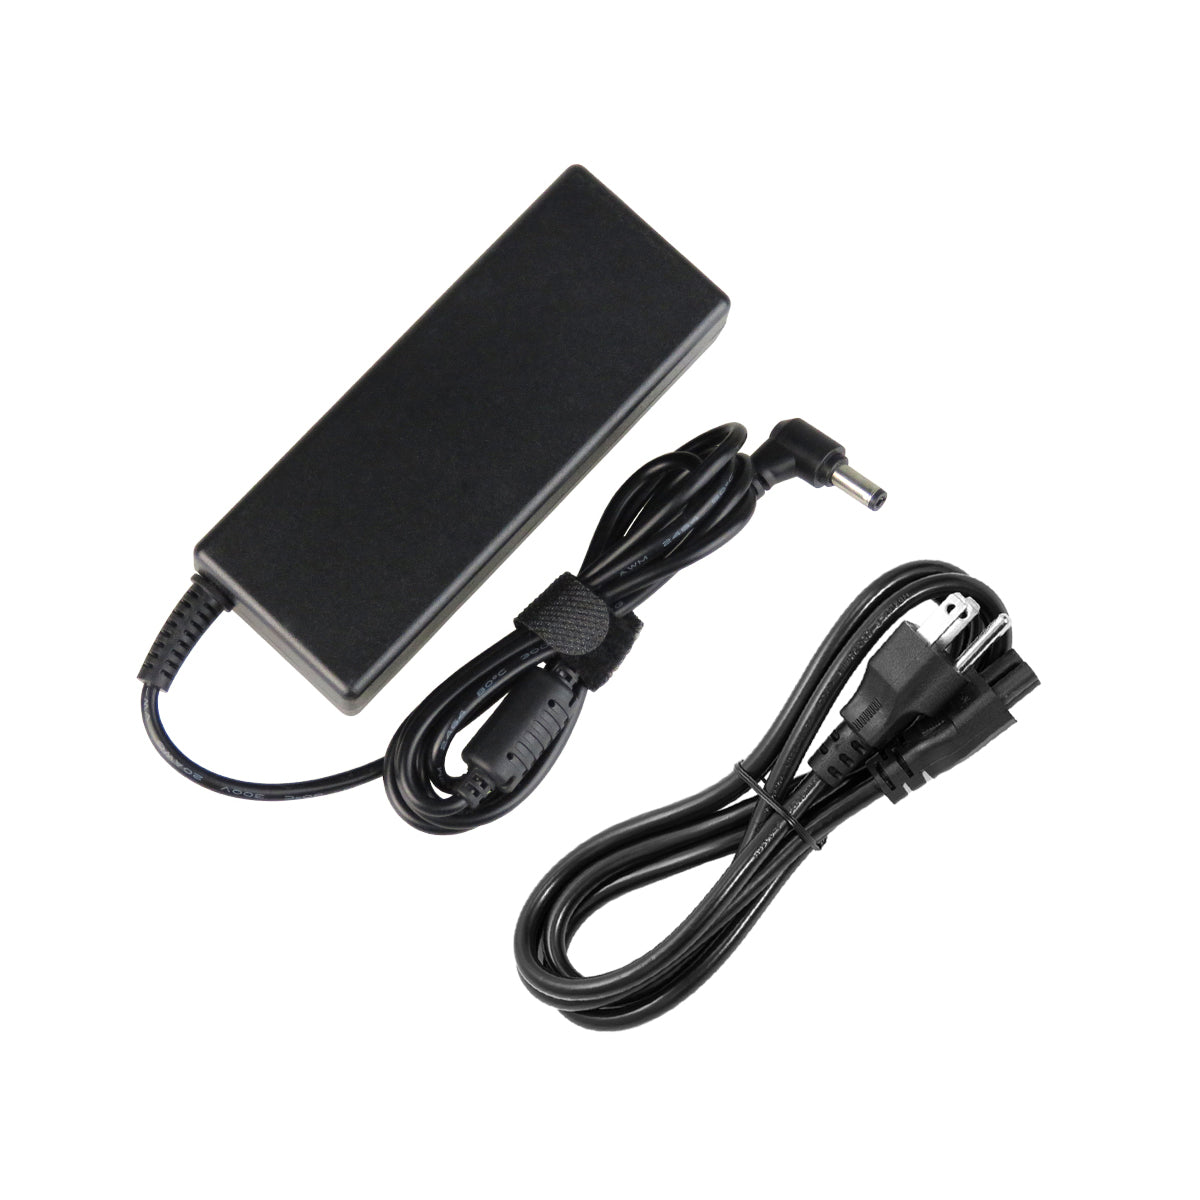 AC Adapter Charger for ASUS G51J Notebook.